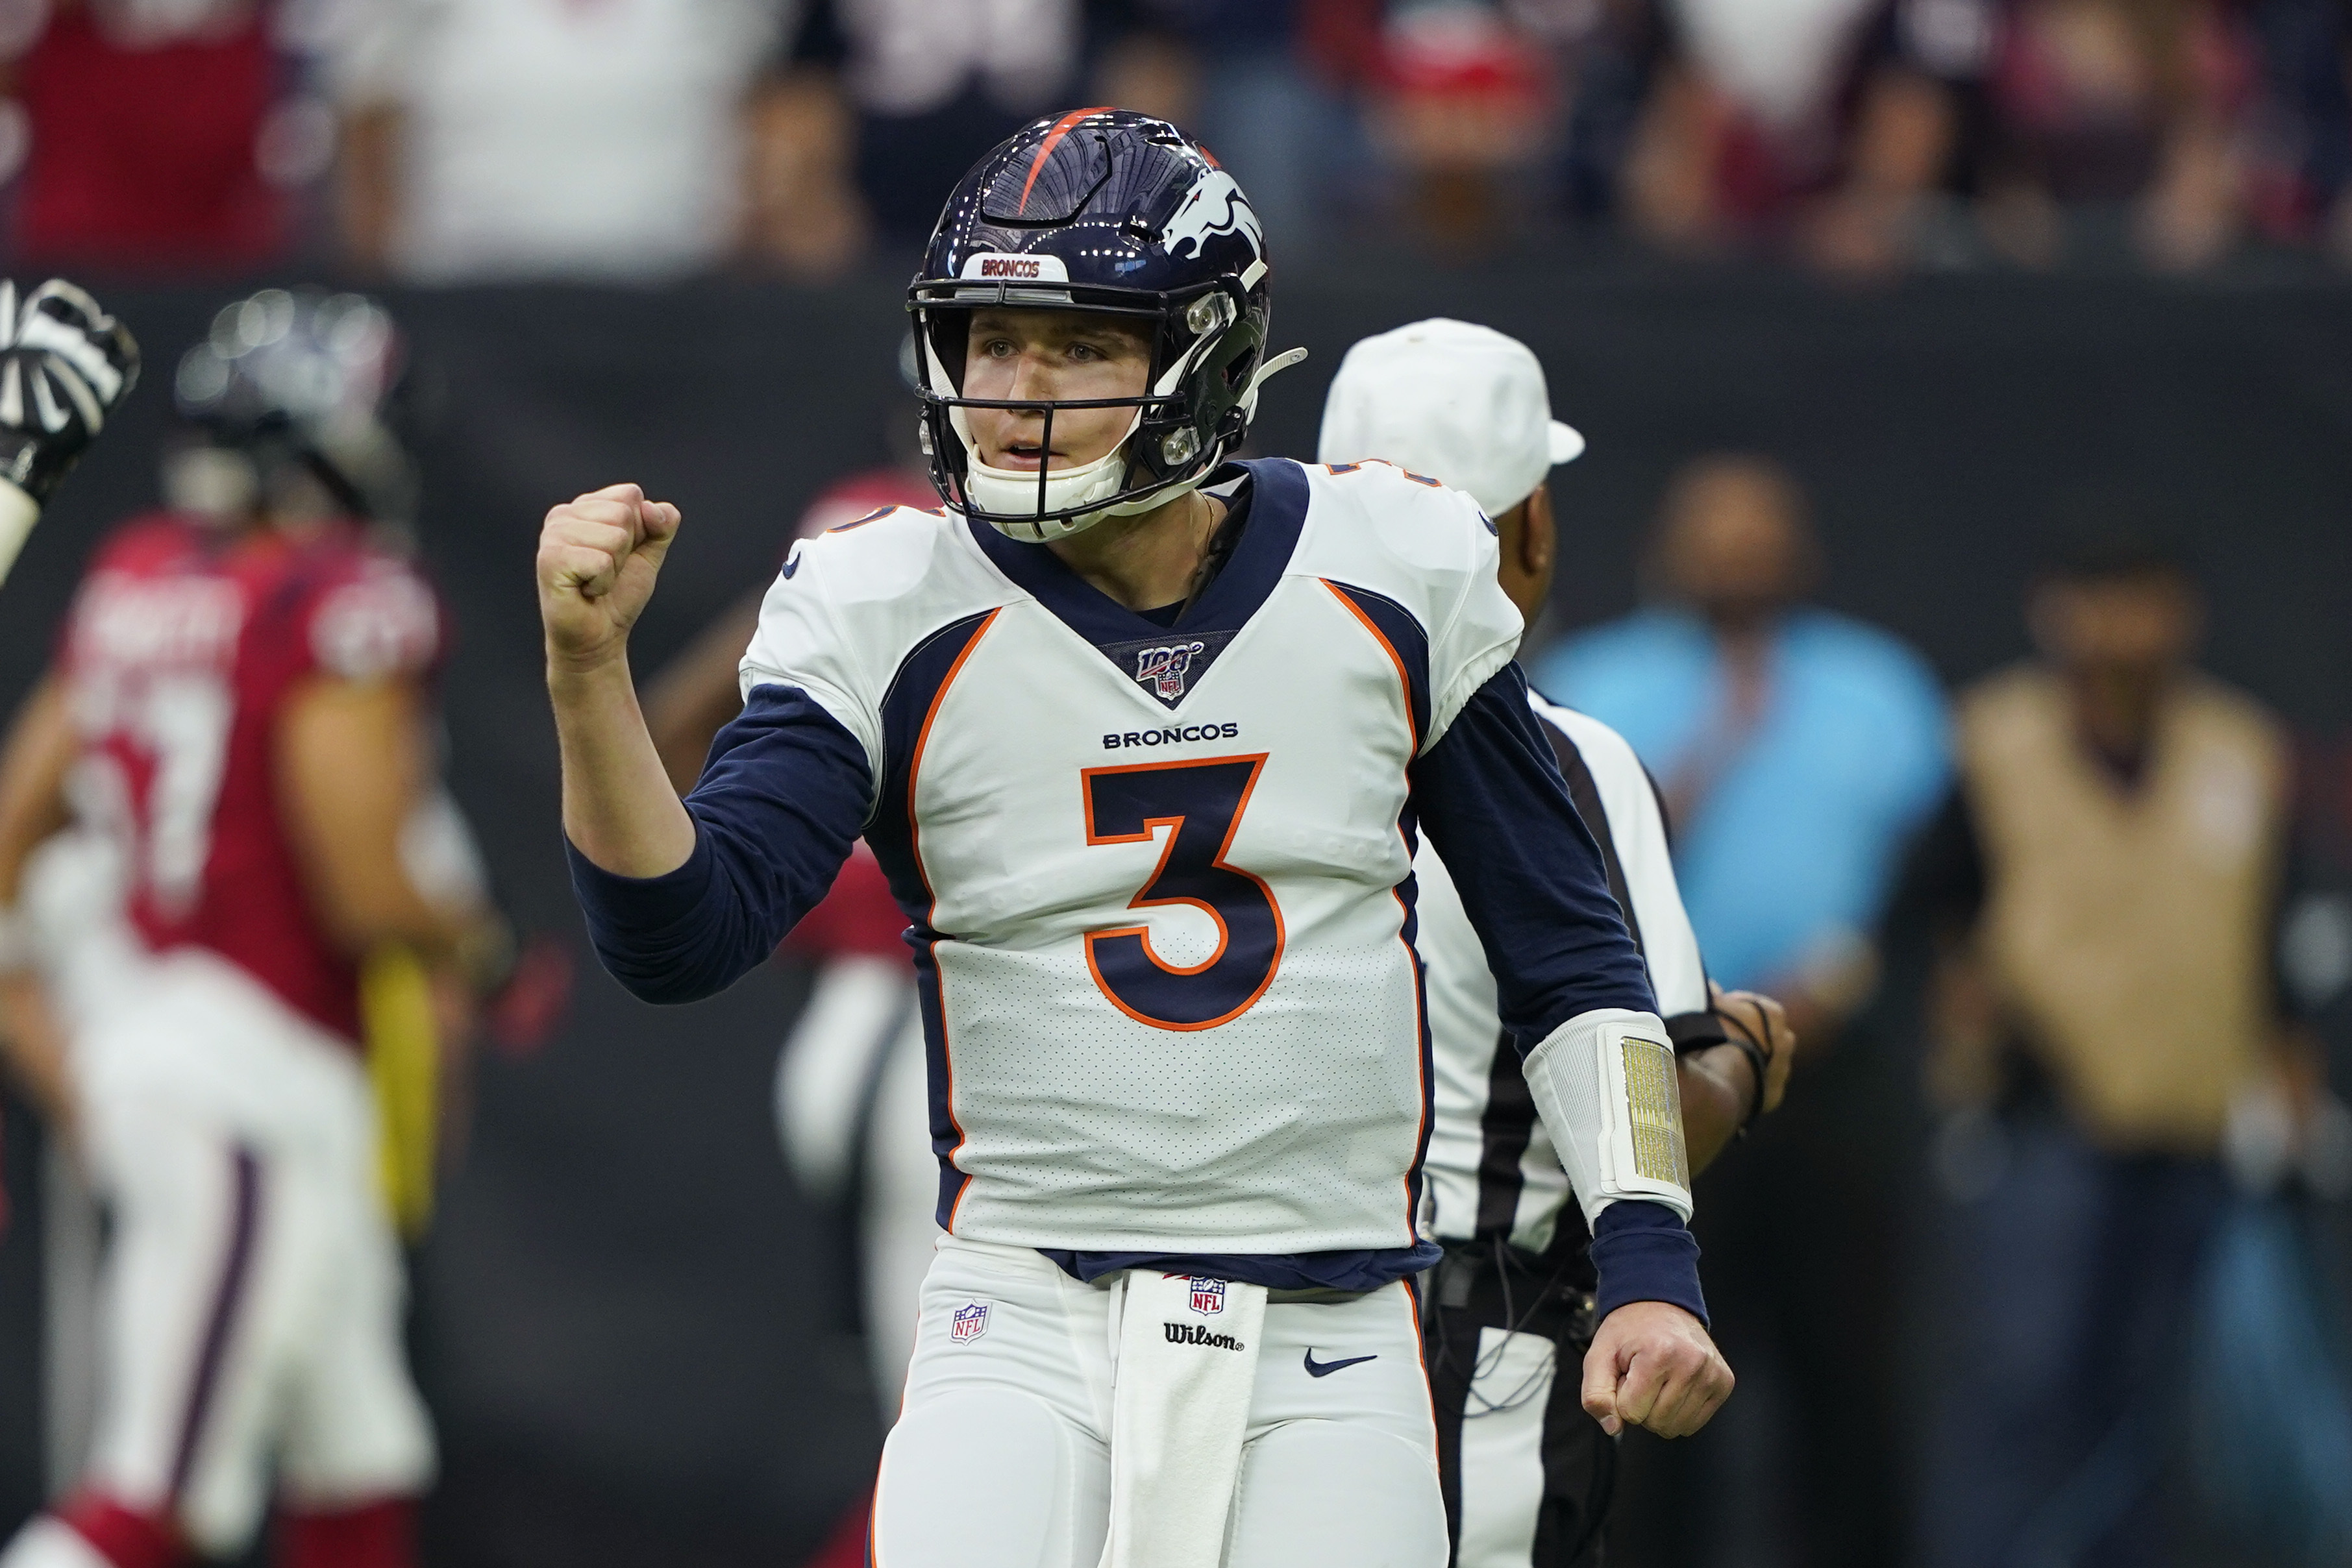 Lock throws 3 TDs in first half as Broncos beat Texans 38-24